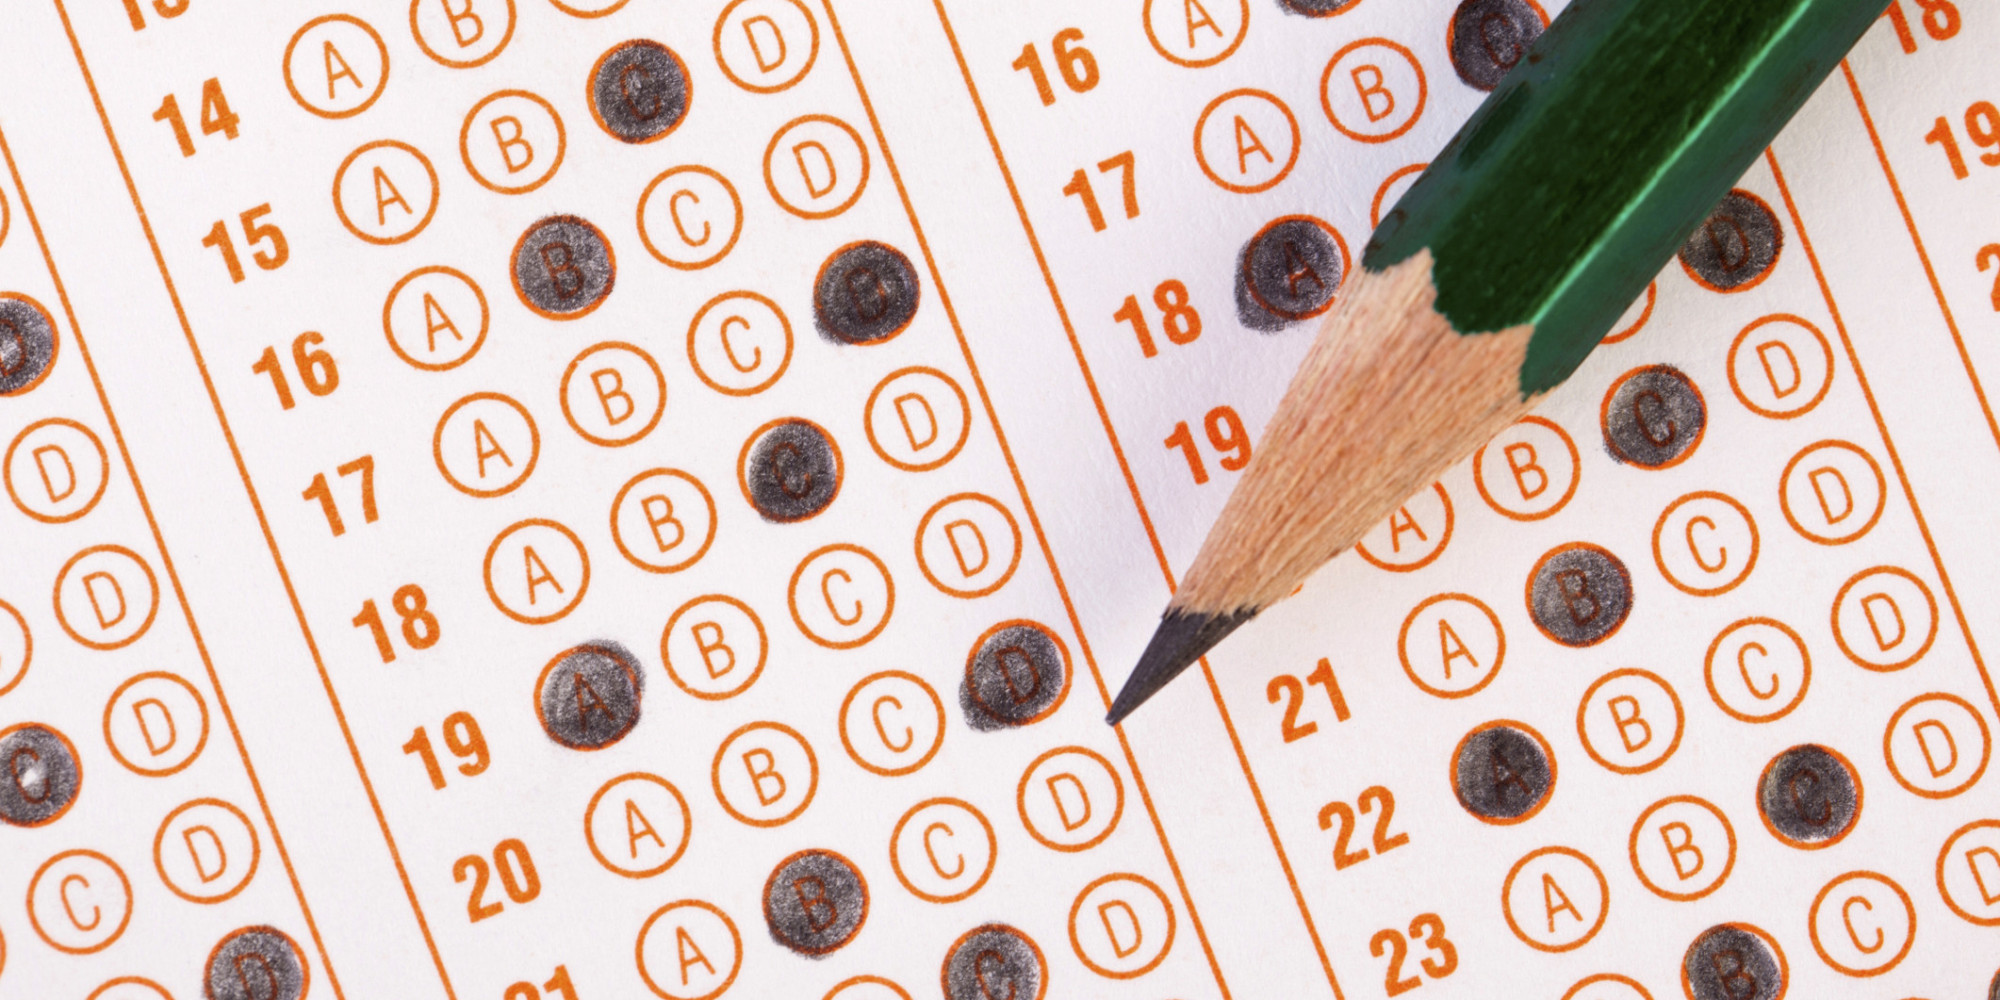 florida-school-district-sets-precedent-by-opting-out-of-state-testing-huffpost